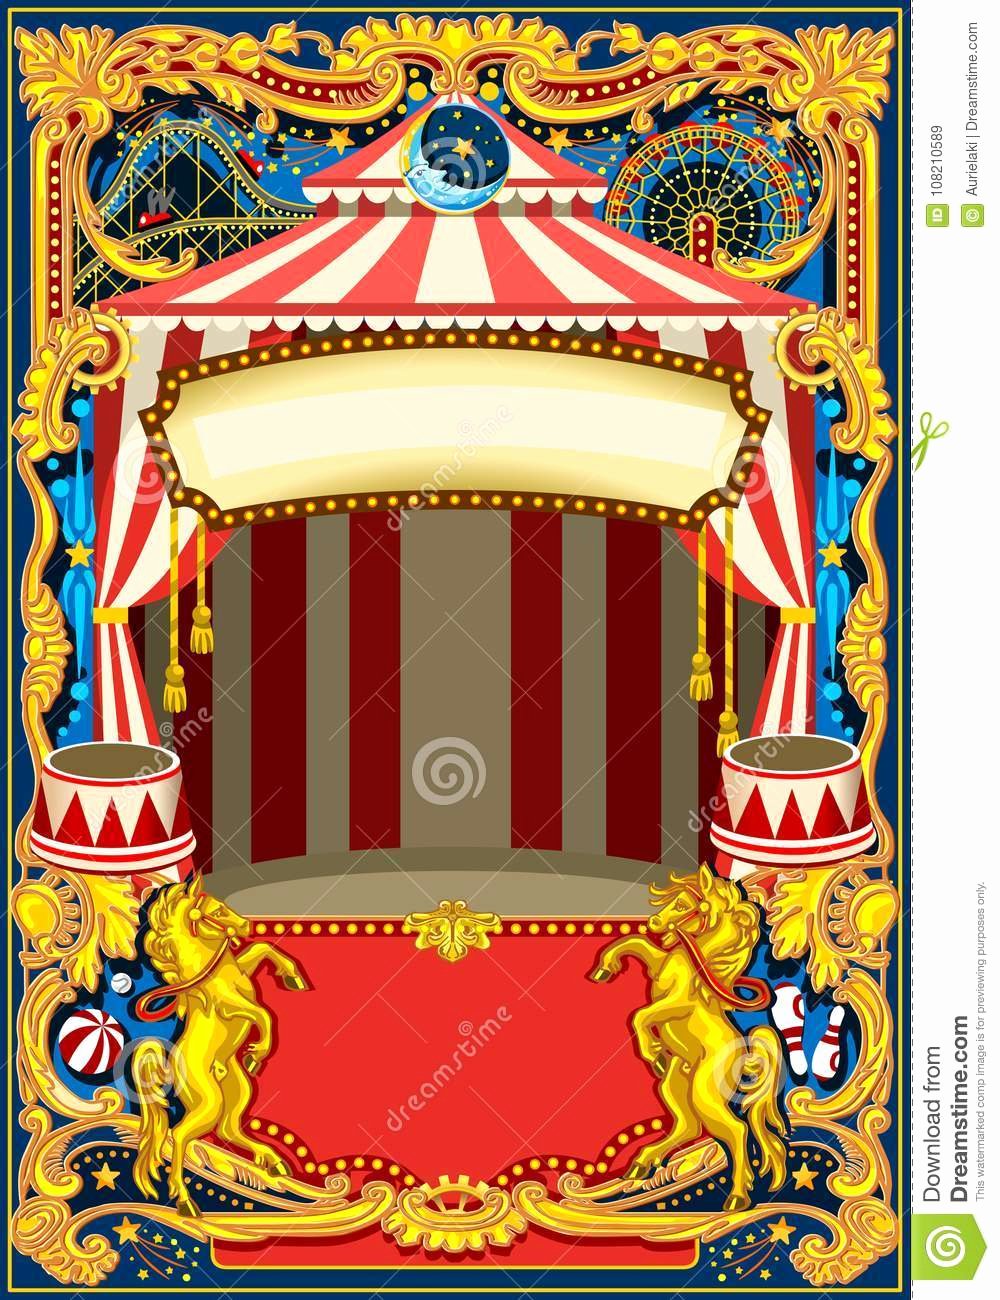 Circus Poster Template Free Download Inspirational Circus Poster Vector Frame Stock Vector Illustration Of Circus